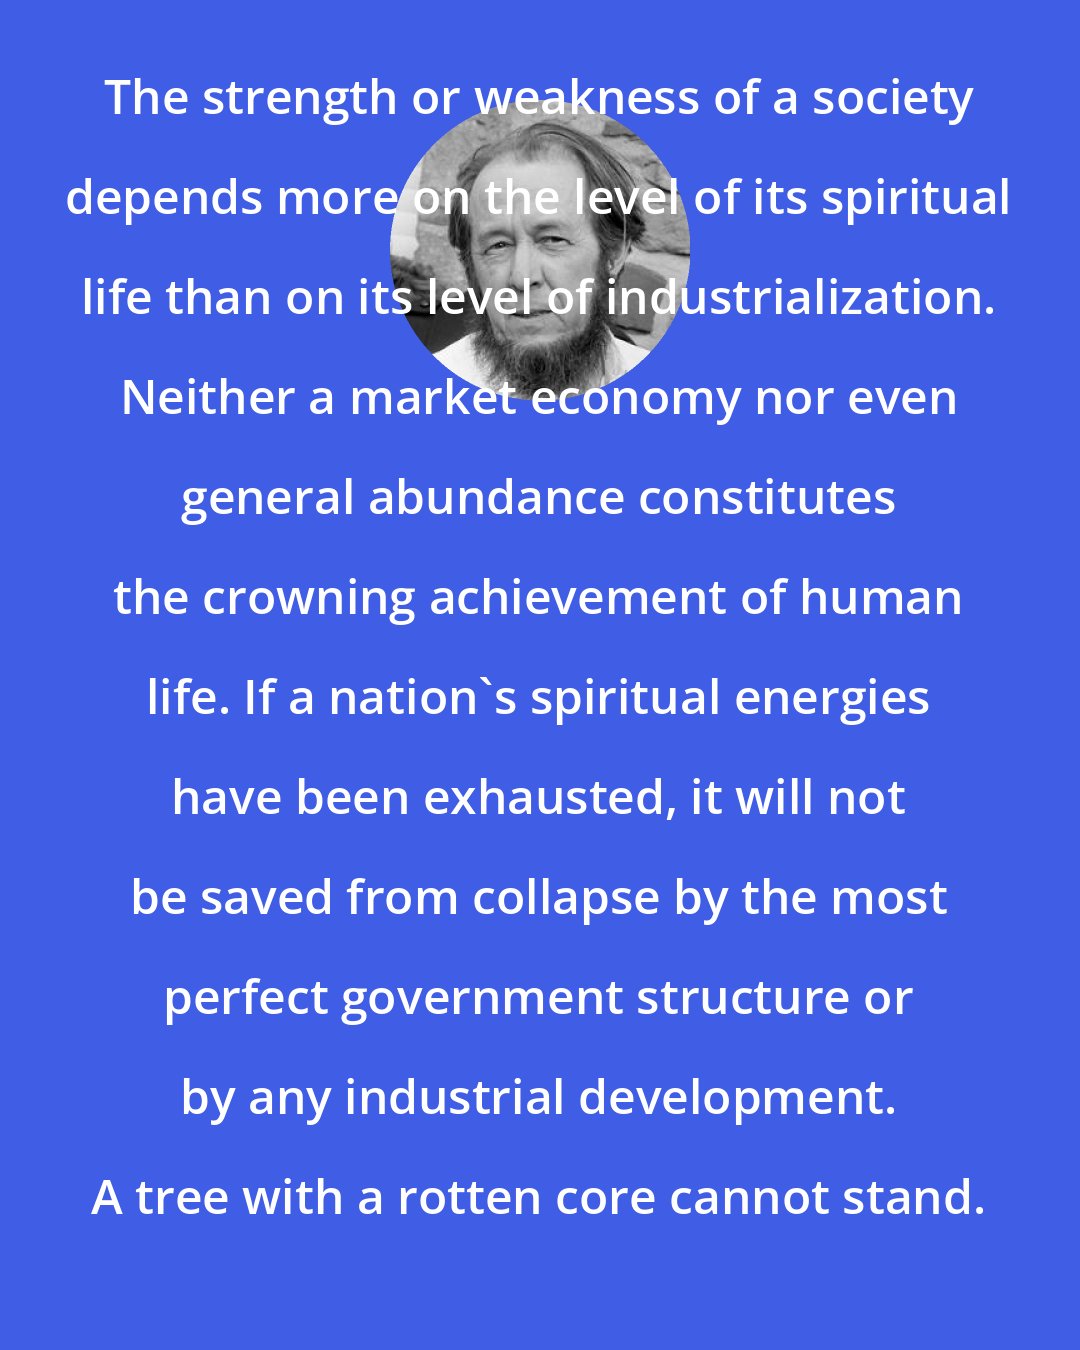 Aleksandr Solzhenitsyn: The strength or weakness of a society depends more on the level of its spiritual life than on its level of industrialization. Neither a market economy nor even general abundance constitutes the crowning achievement of human life. If a nation's spiritual energies have been exhausted, it will not be saved from collapse by the most perfect government structure or by any industrial development. A tree with a rotten core cannot stand.